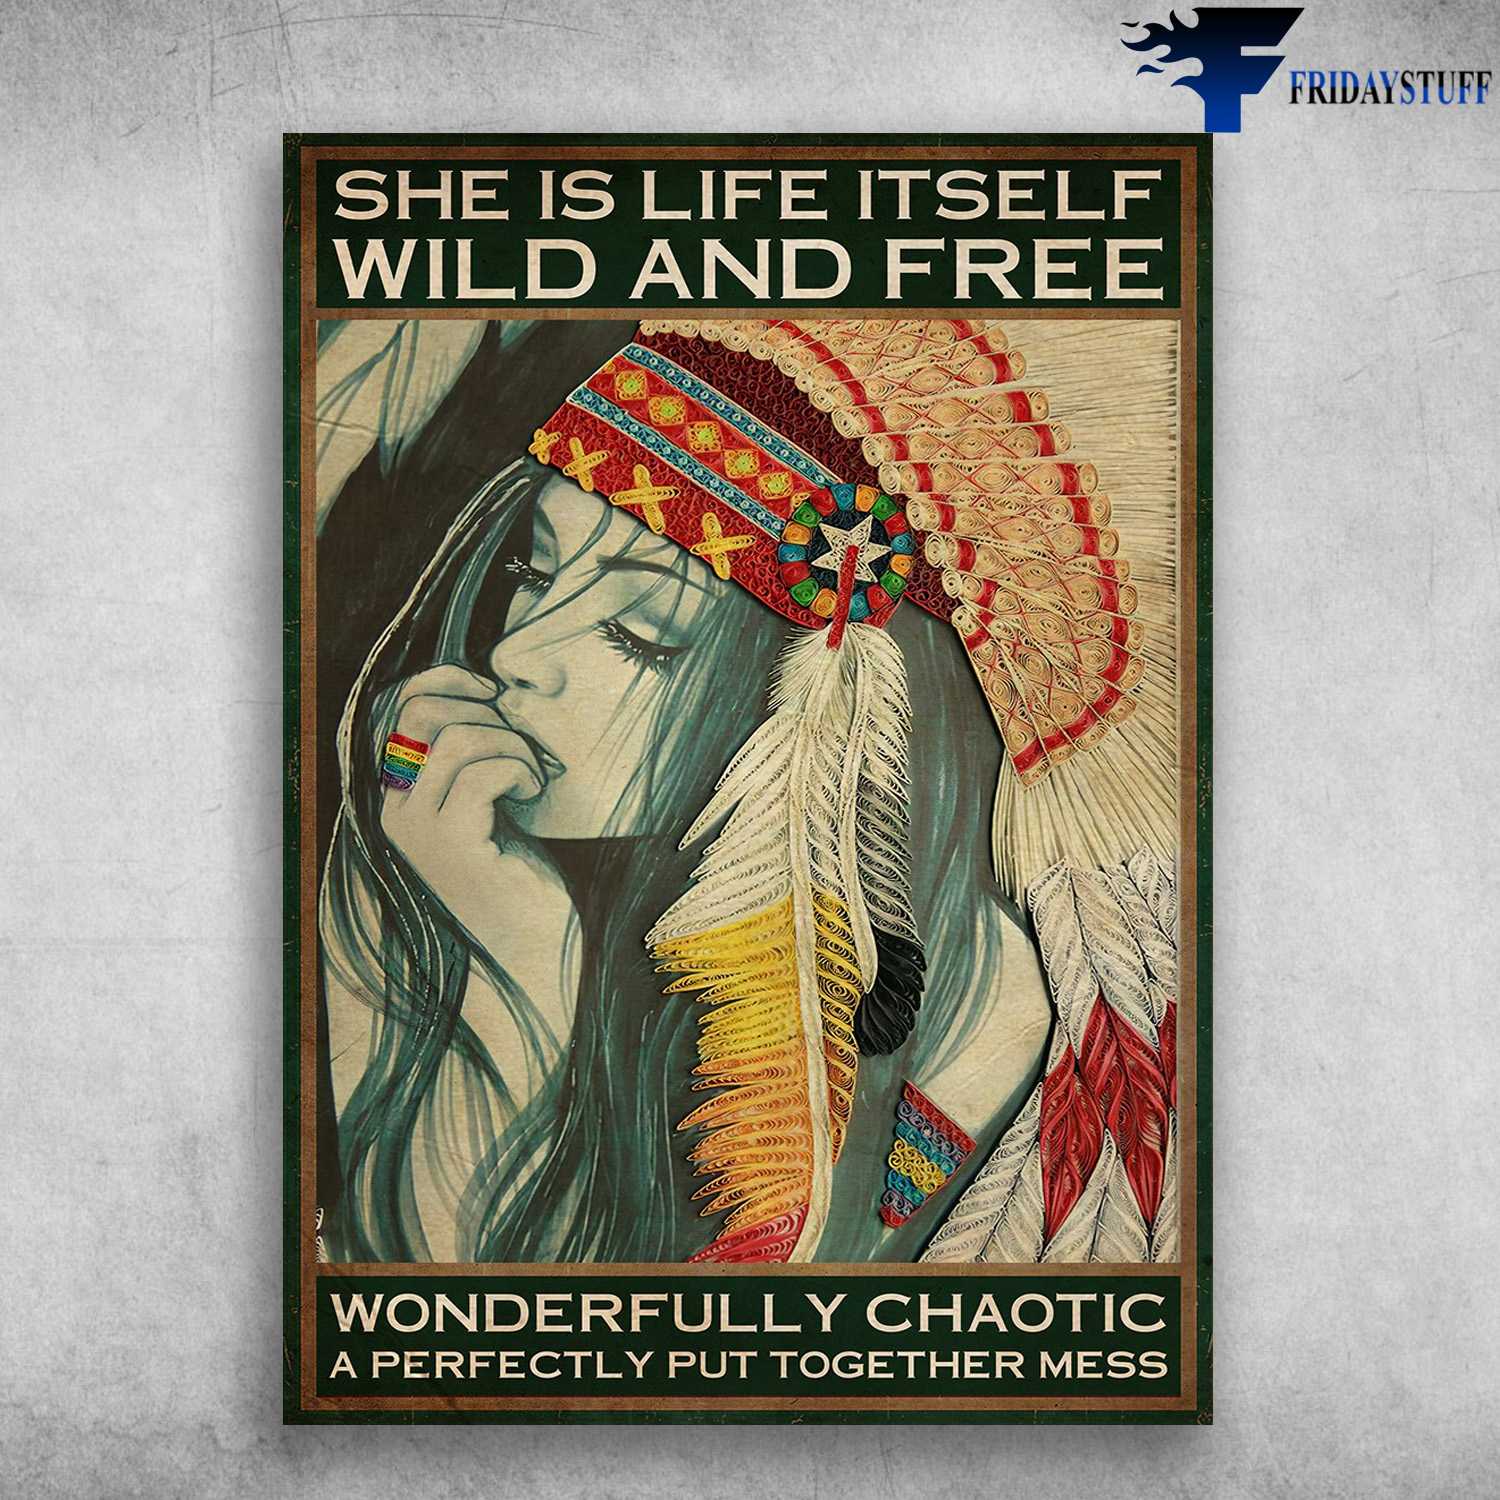 Native Girl, Native American - She Is Life Itself, Wild And Free, Wonderfully Chaotic, A Perfectly Put Together Mess